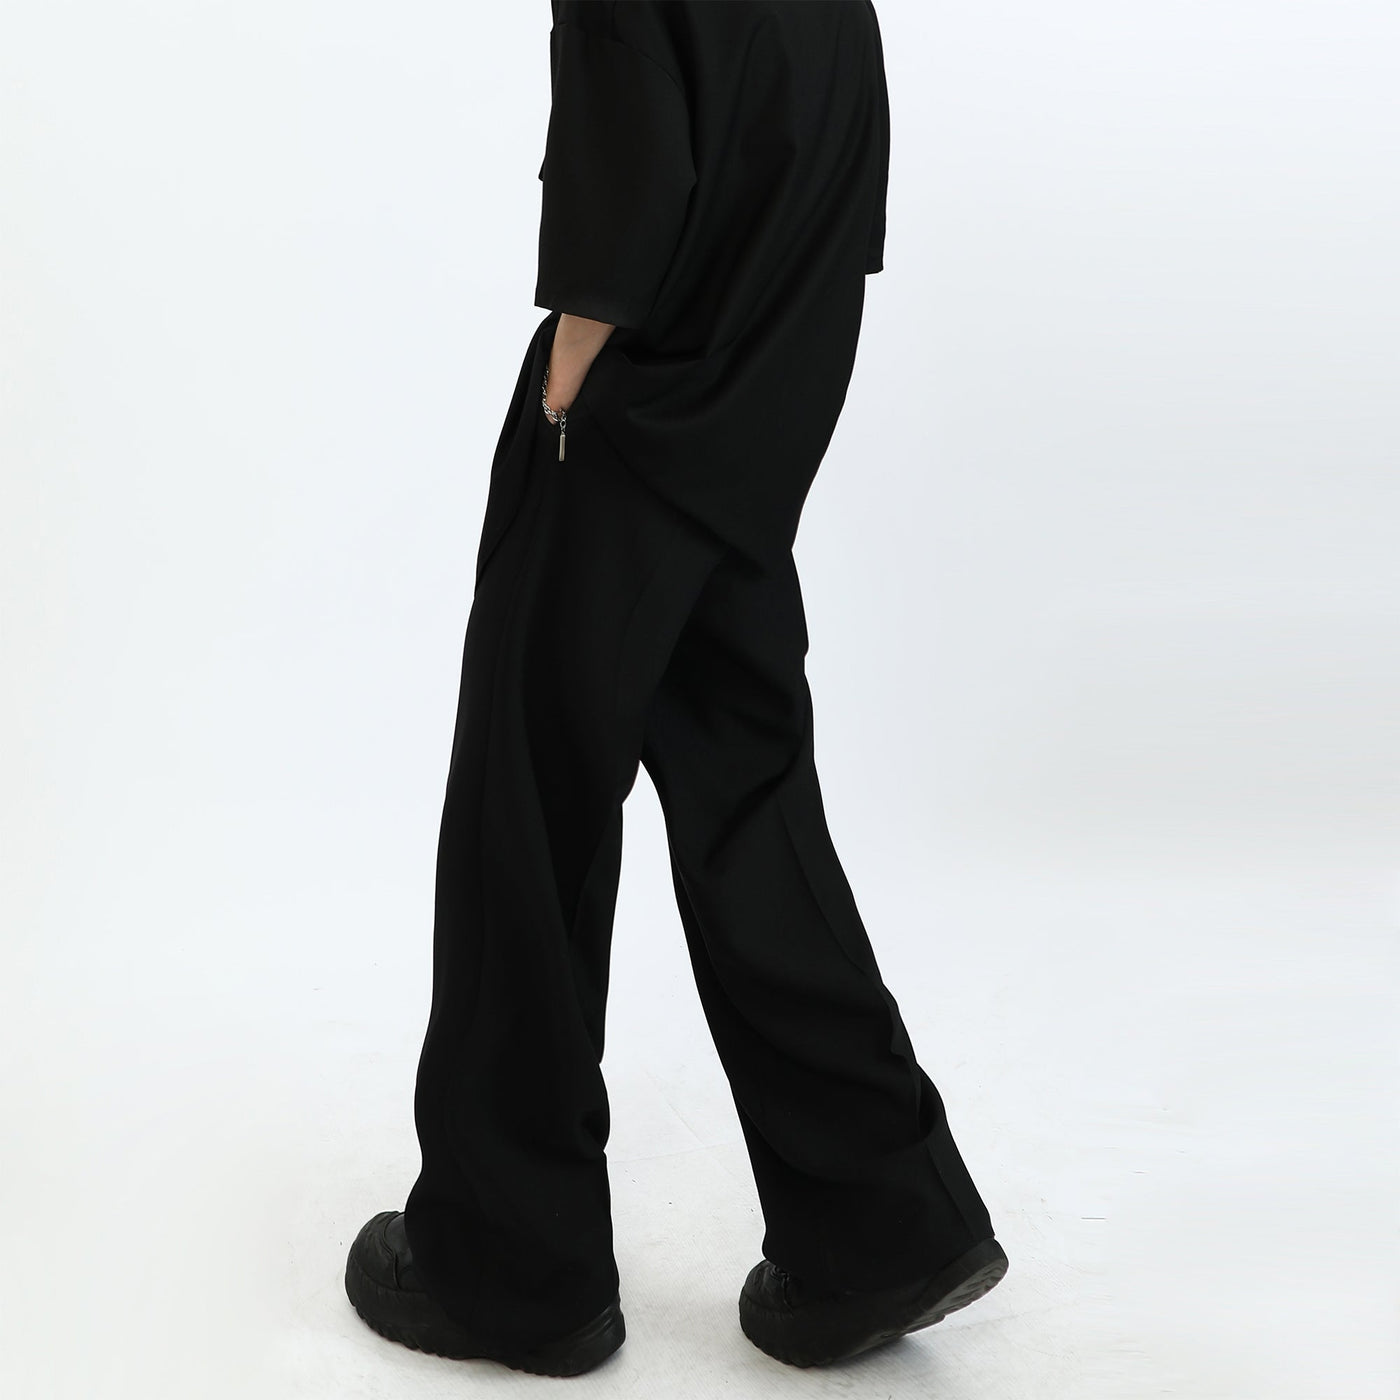 Casual Pleated Trousers Korean Street Fashion Pants By Ash Dark Shop Online at OH Vault